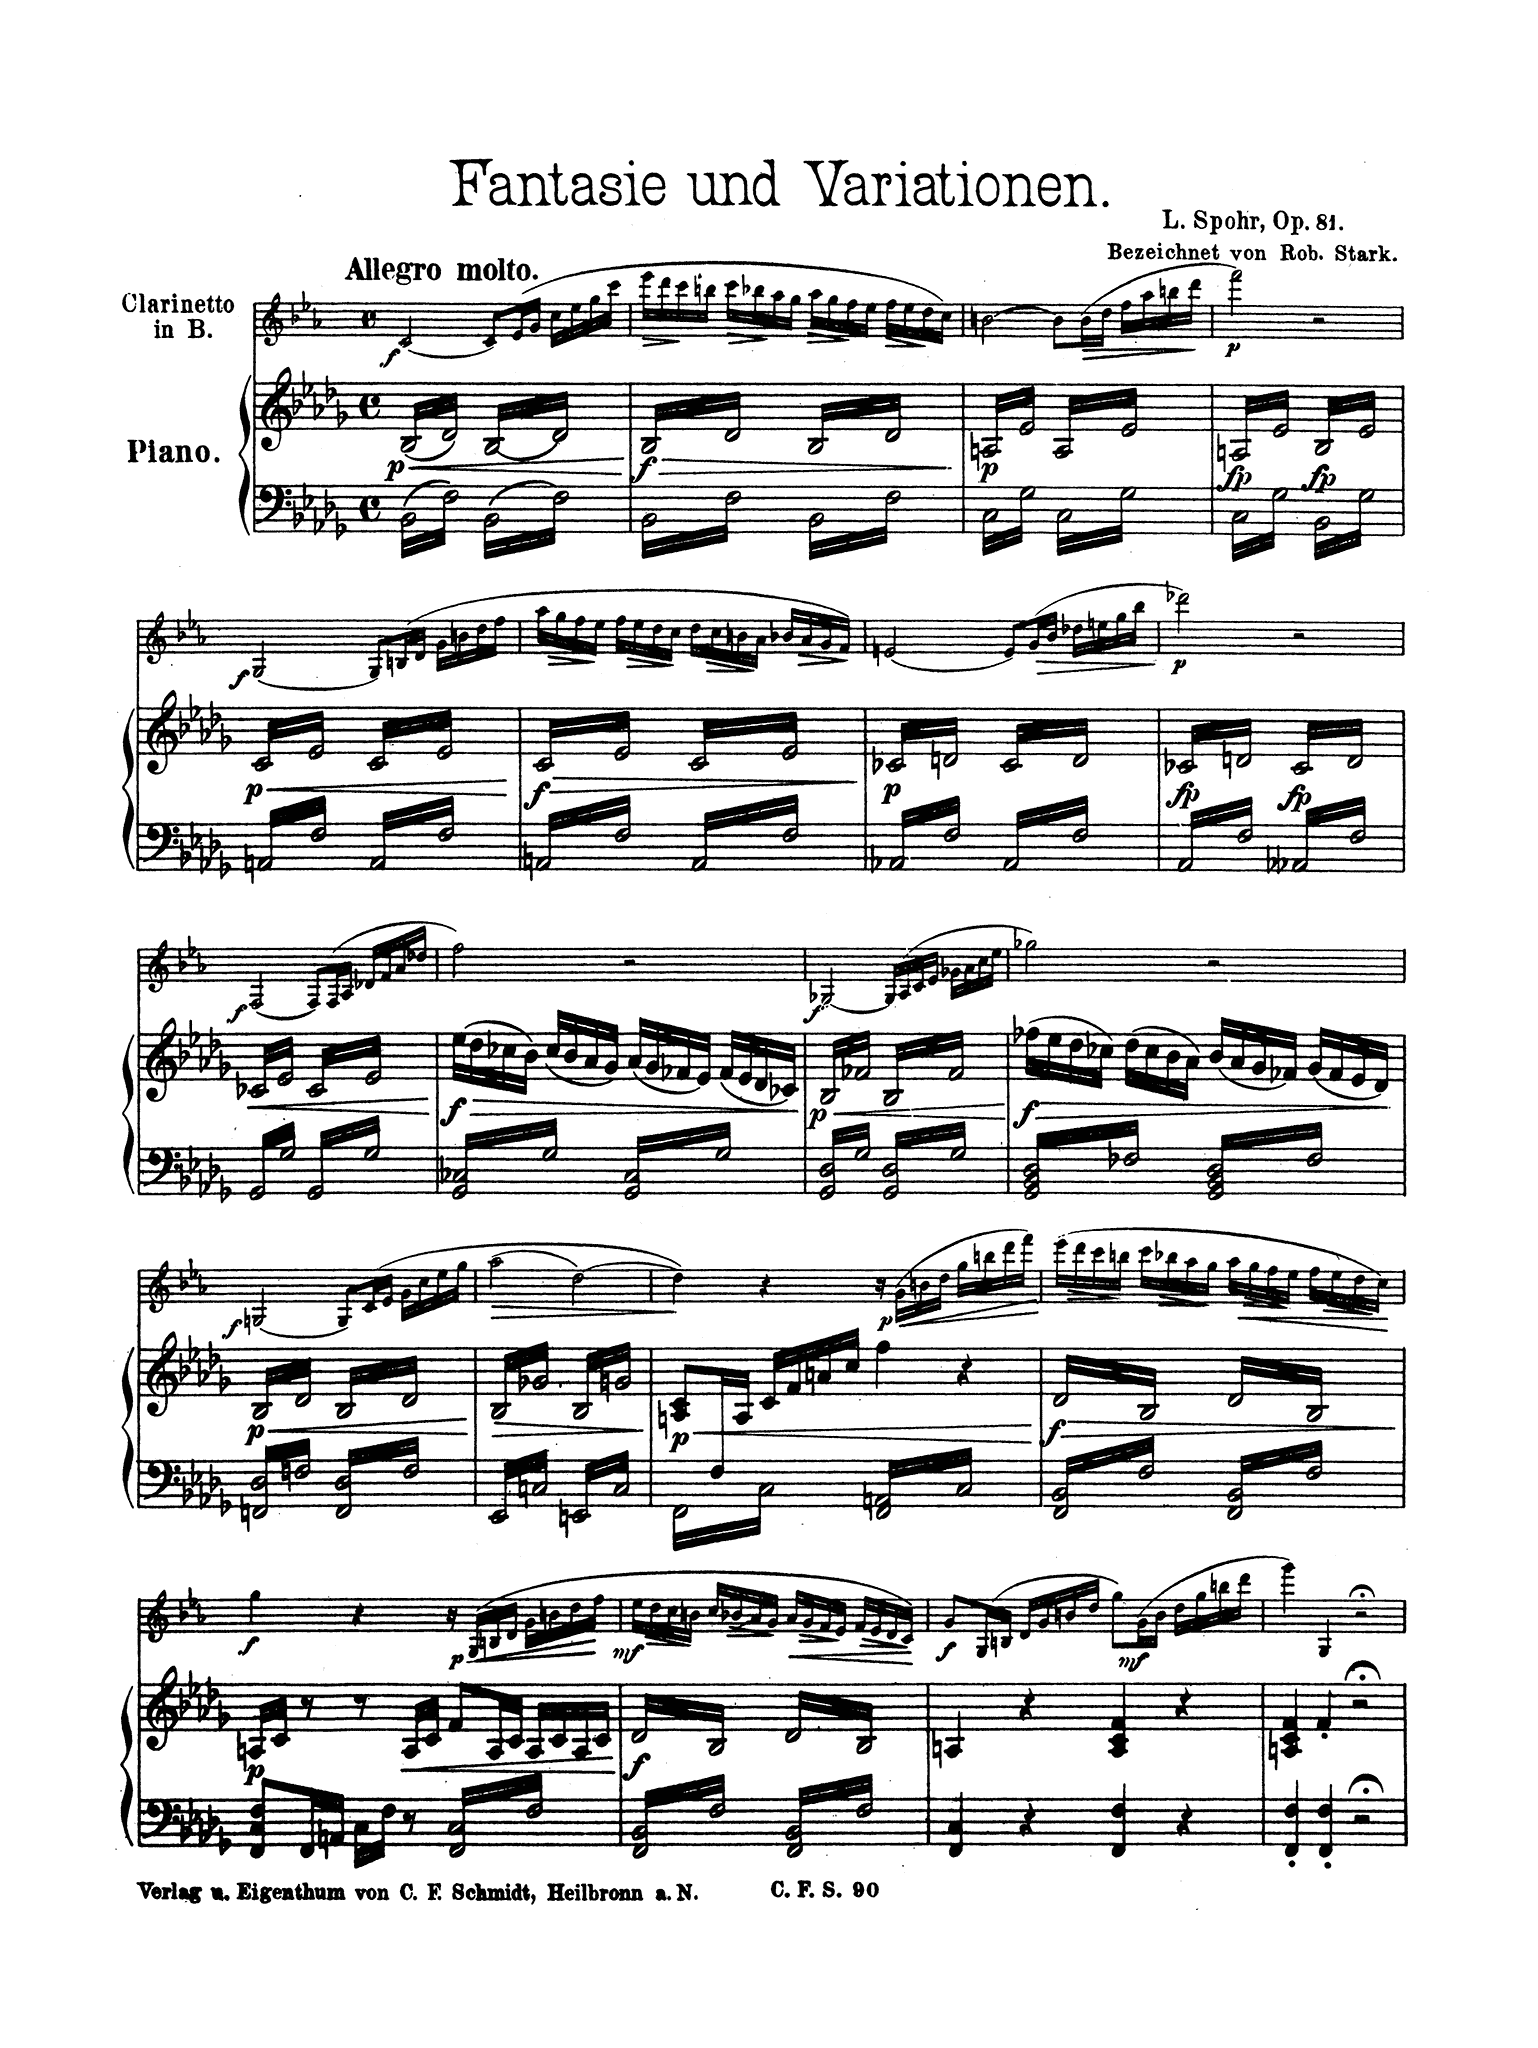 Spohr Fantasy & Variations on a Theme of Danzi, Op. 81 clarinet and piano score